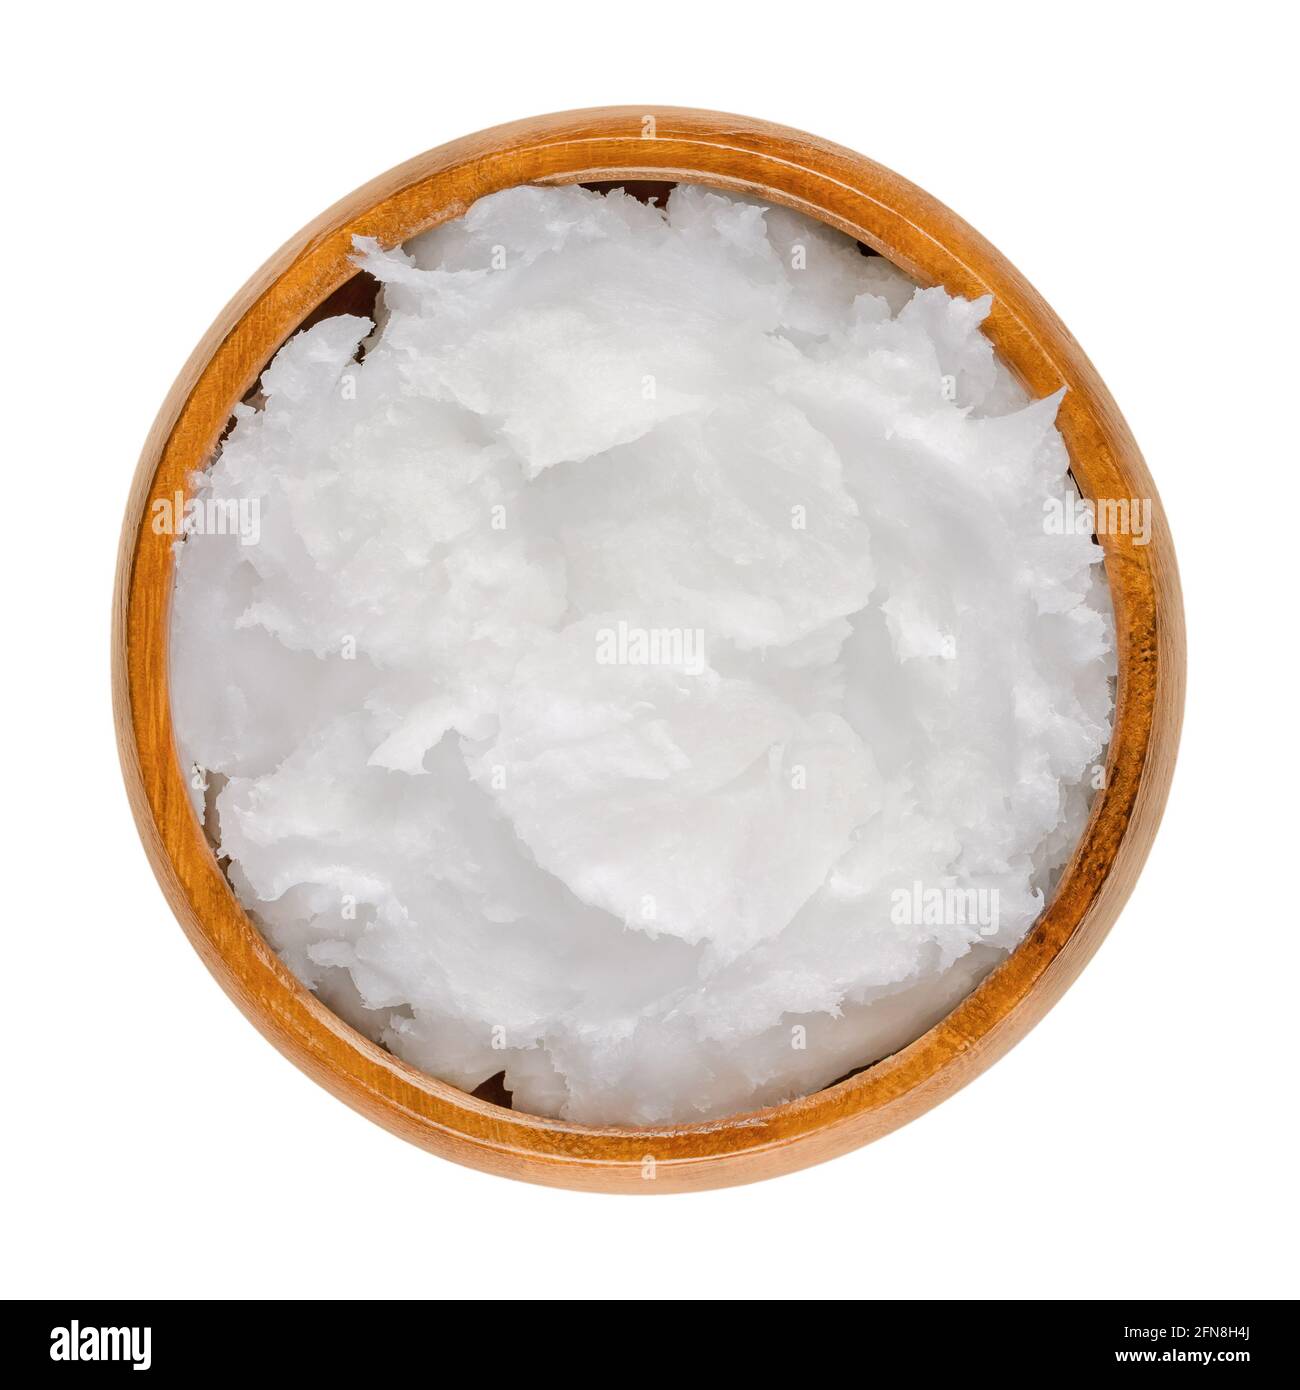 Coconut oil in a wooden bowl. Unrefined coconut butter, an edible oil, derived from the wick, meat, and milk of the coconut palm fruit. Stock Photo